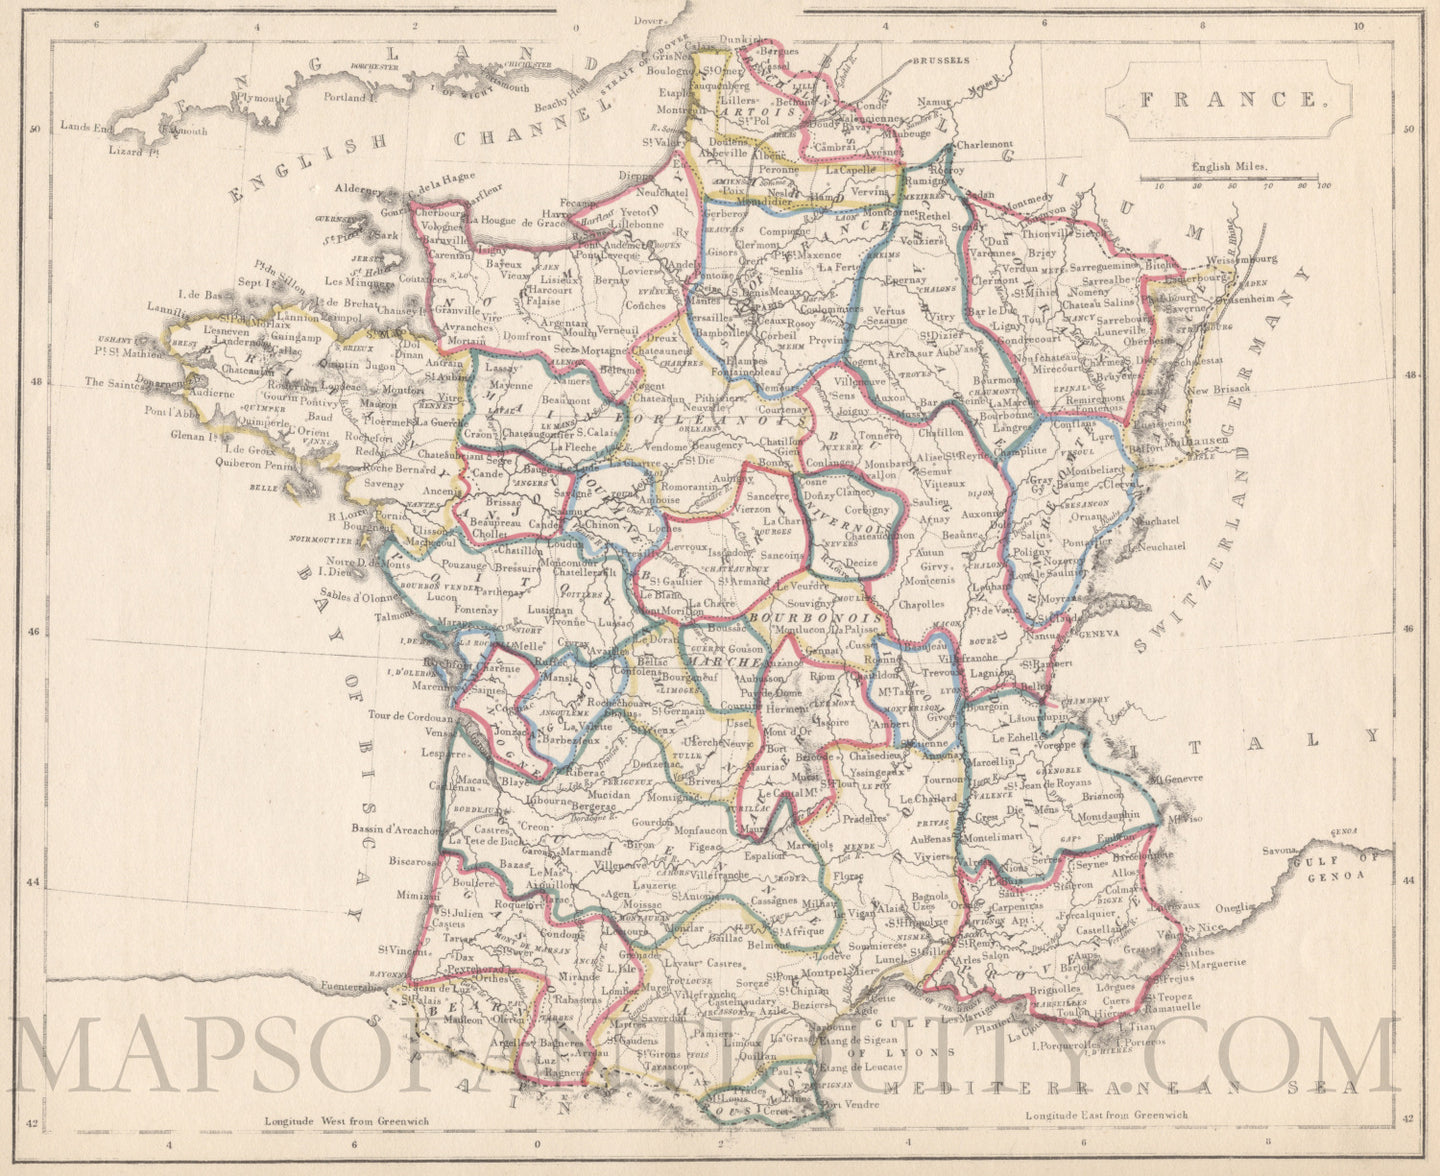 Antique-Hand-Colored-Map-France-Europe-France-c.-1850-F.-P.-Becker-and-George-Virtue-Maps-Of-Antiquity